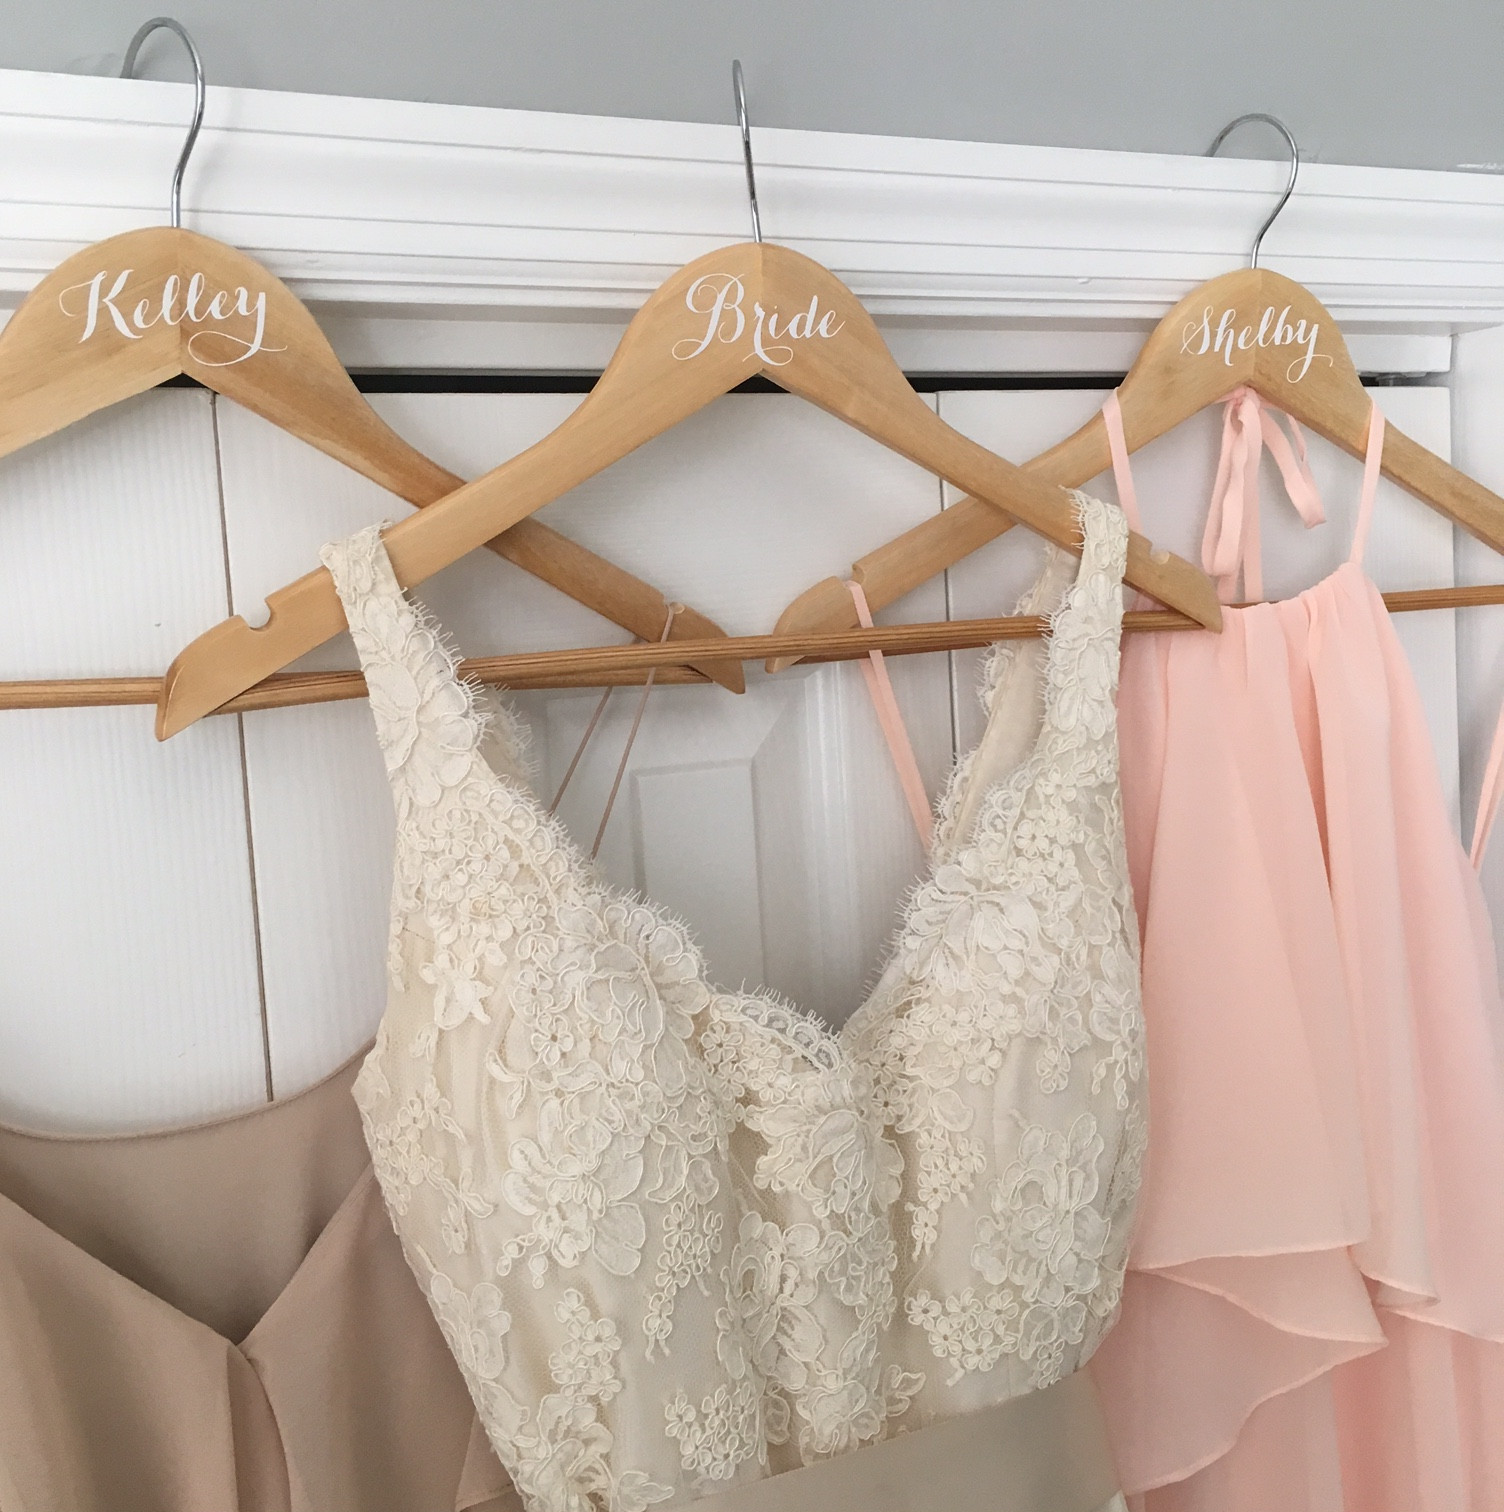 DIY Wedding Hanger
 Personalized Wedding Hangers made with Cricut Explore Air